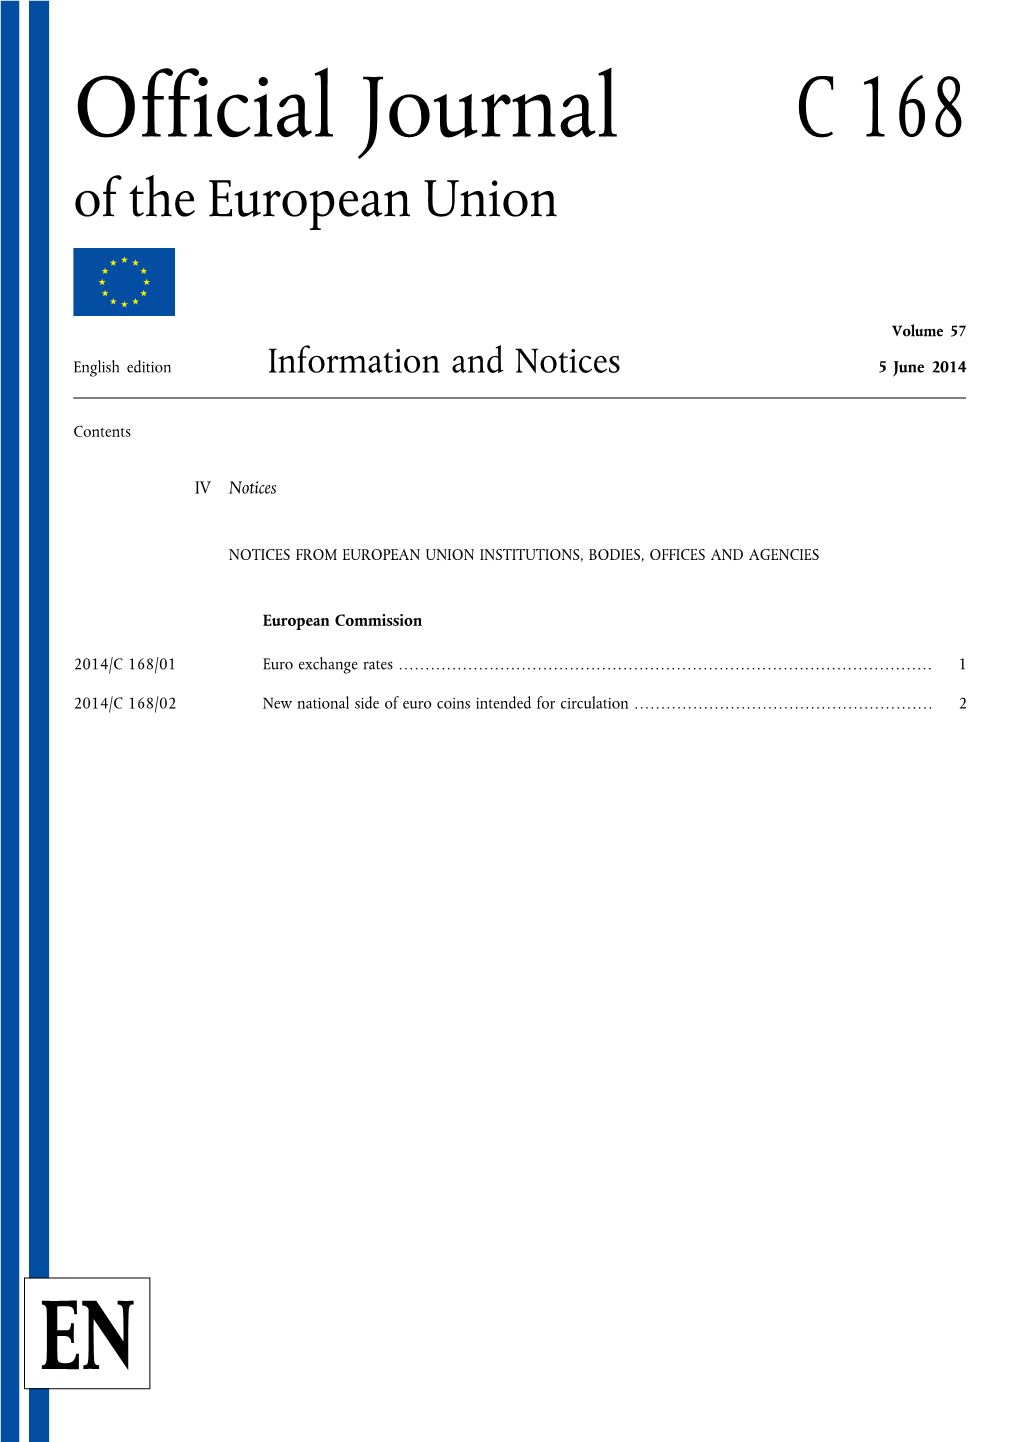 Official Journal C 168 of the European Union